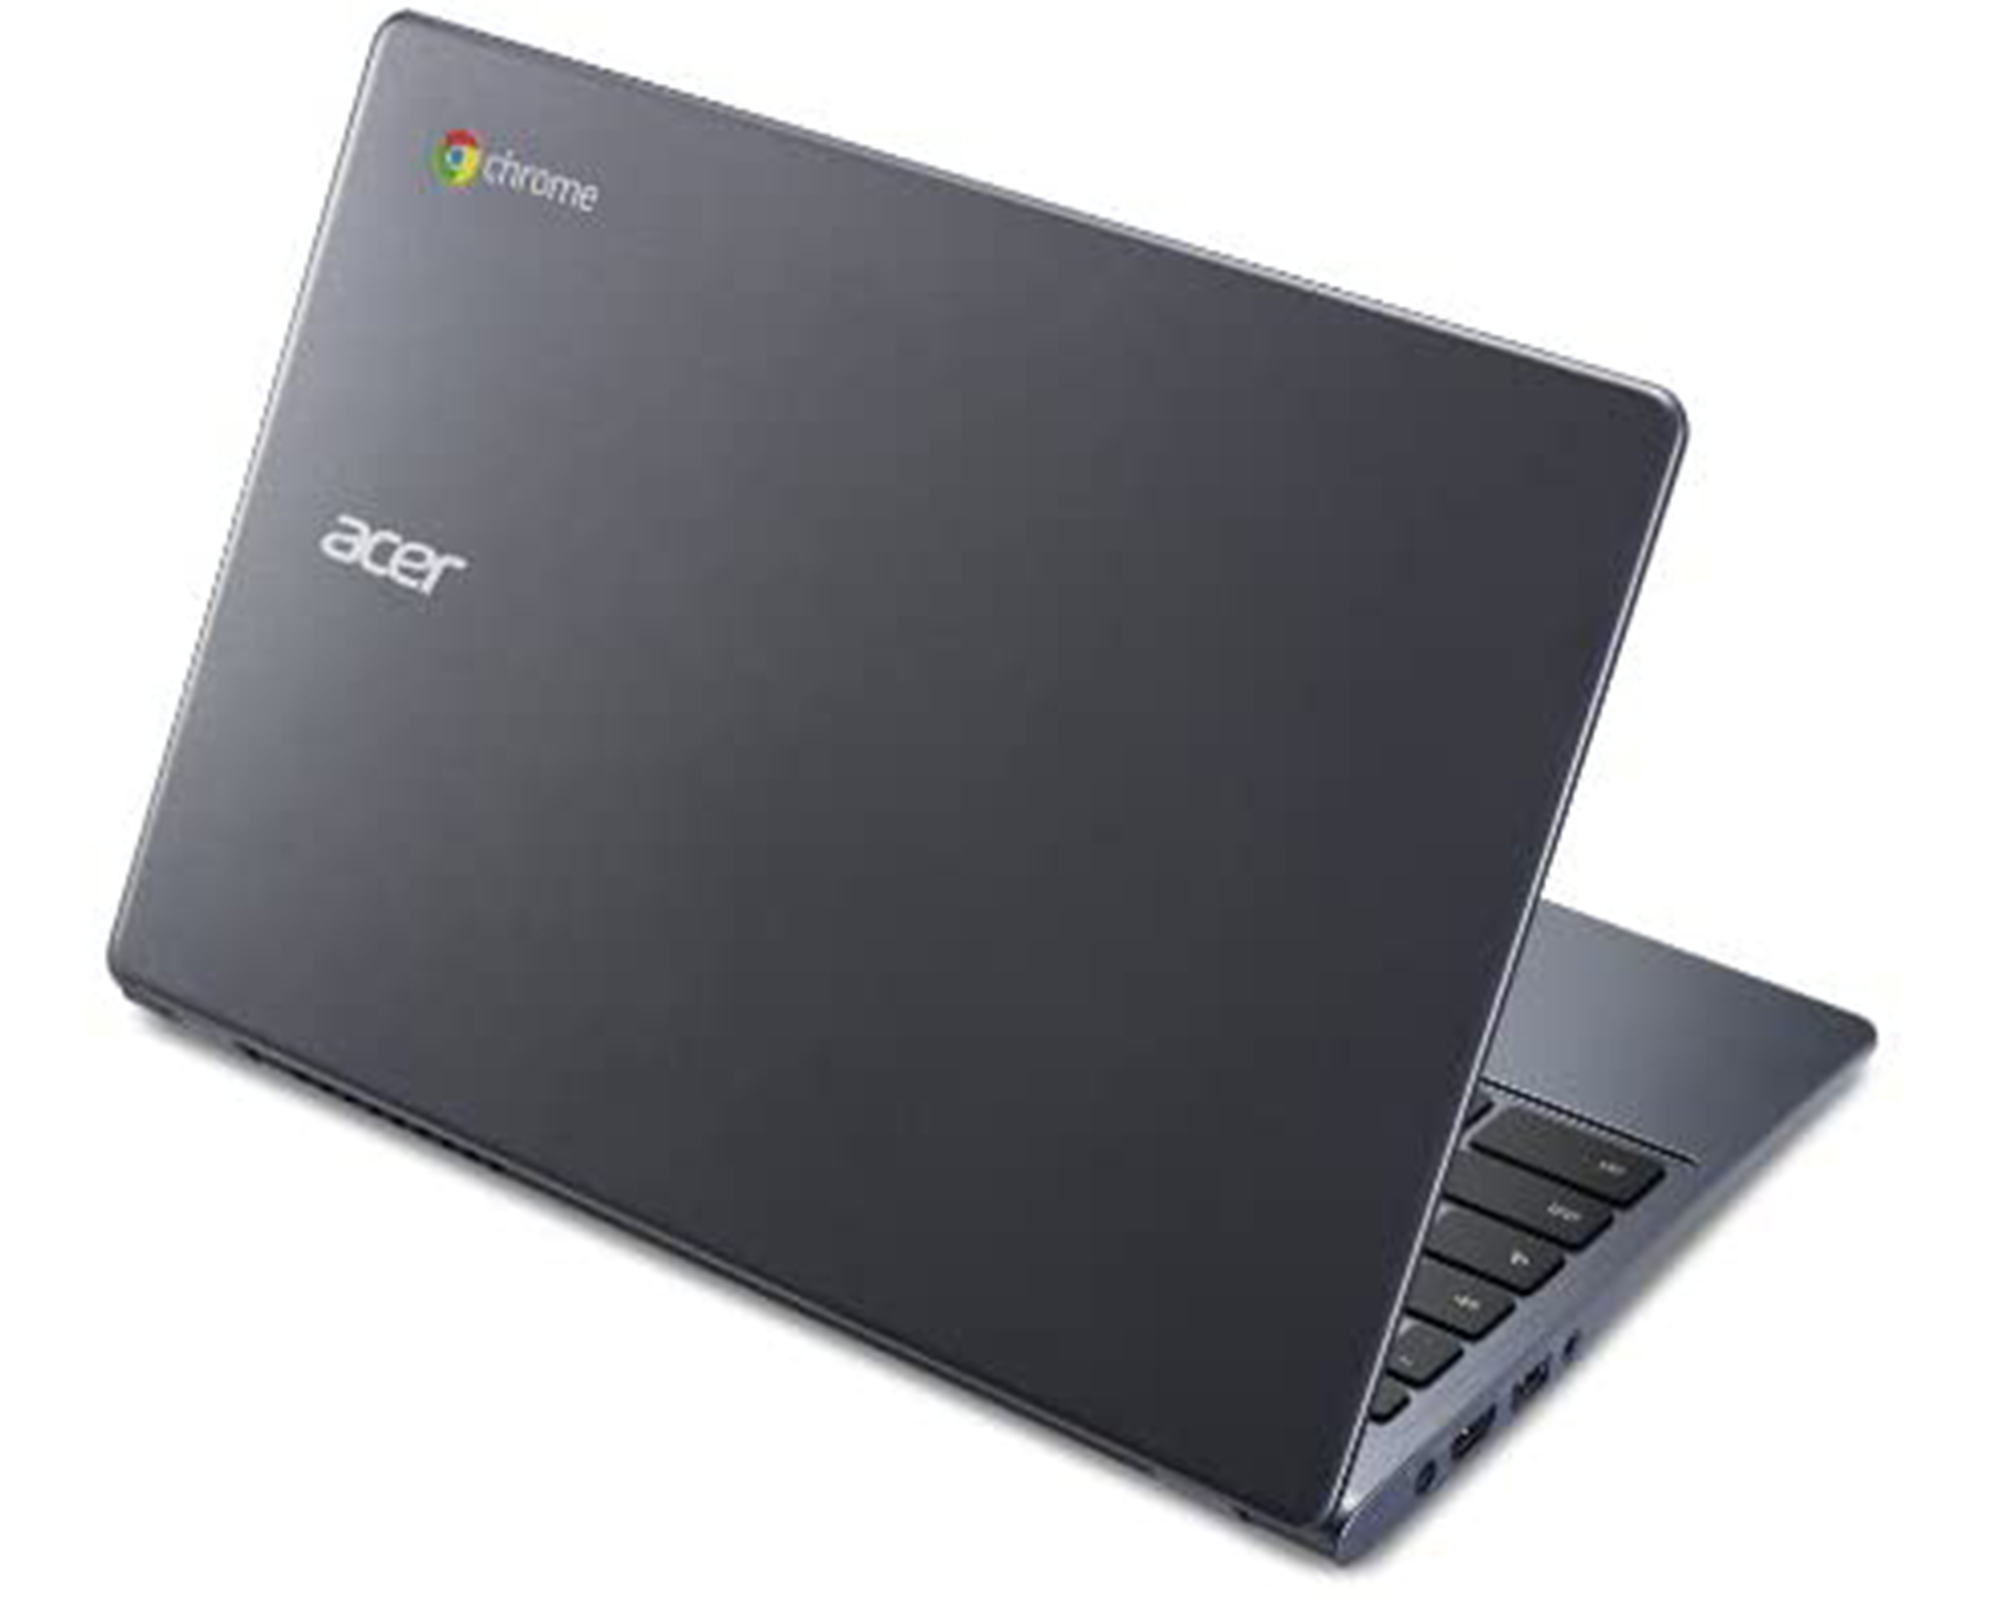 Restored Details about Acer C720-2103 11.6 in chromebook, Intel Celeron 1.4GHz 2GB Ram - image 5 of 8